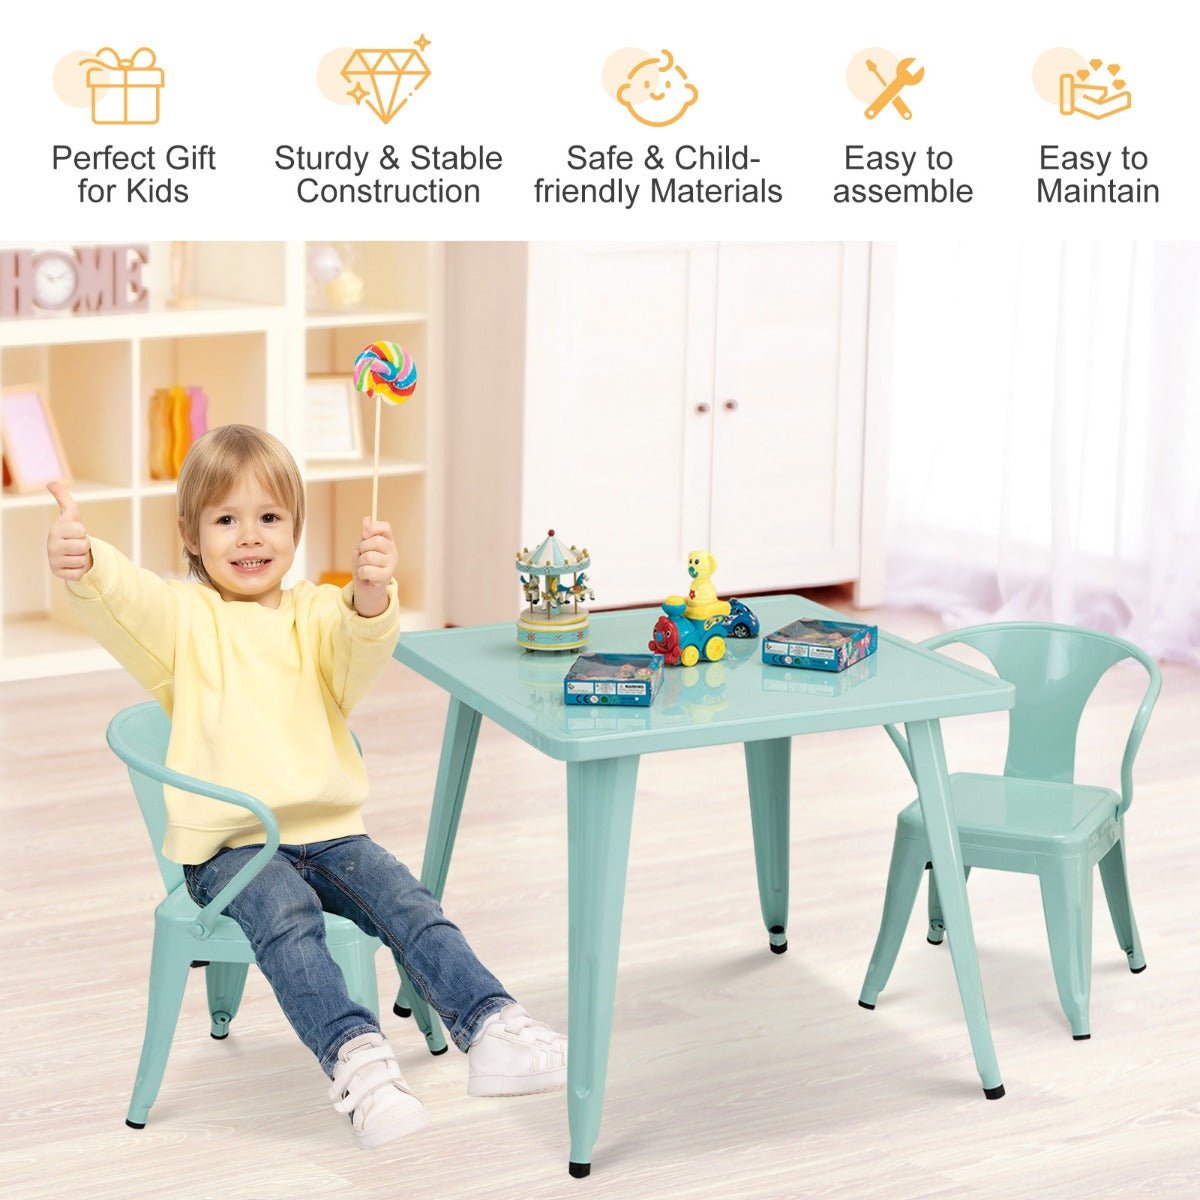 Explore, Create, and Play with Our Furniture Set